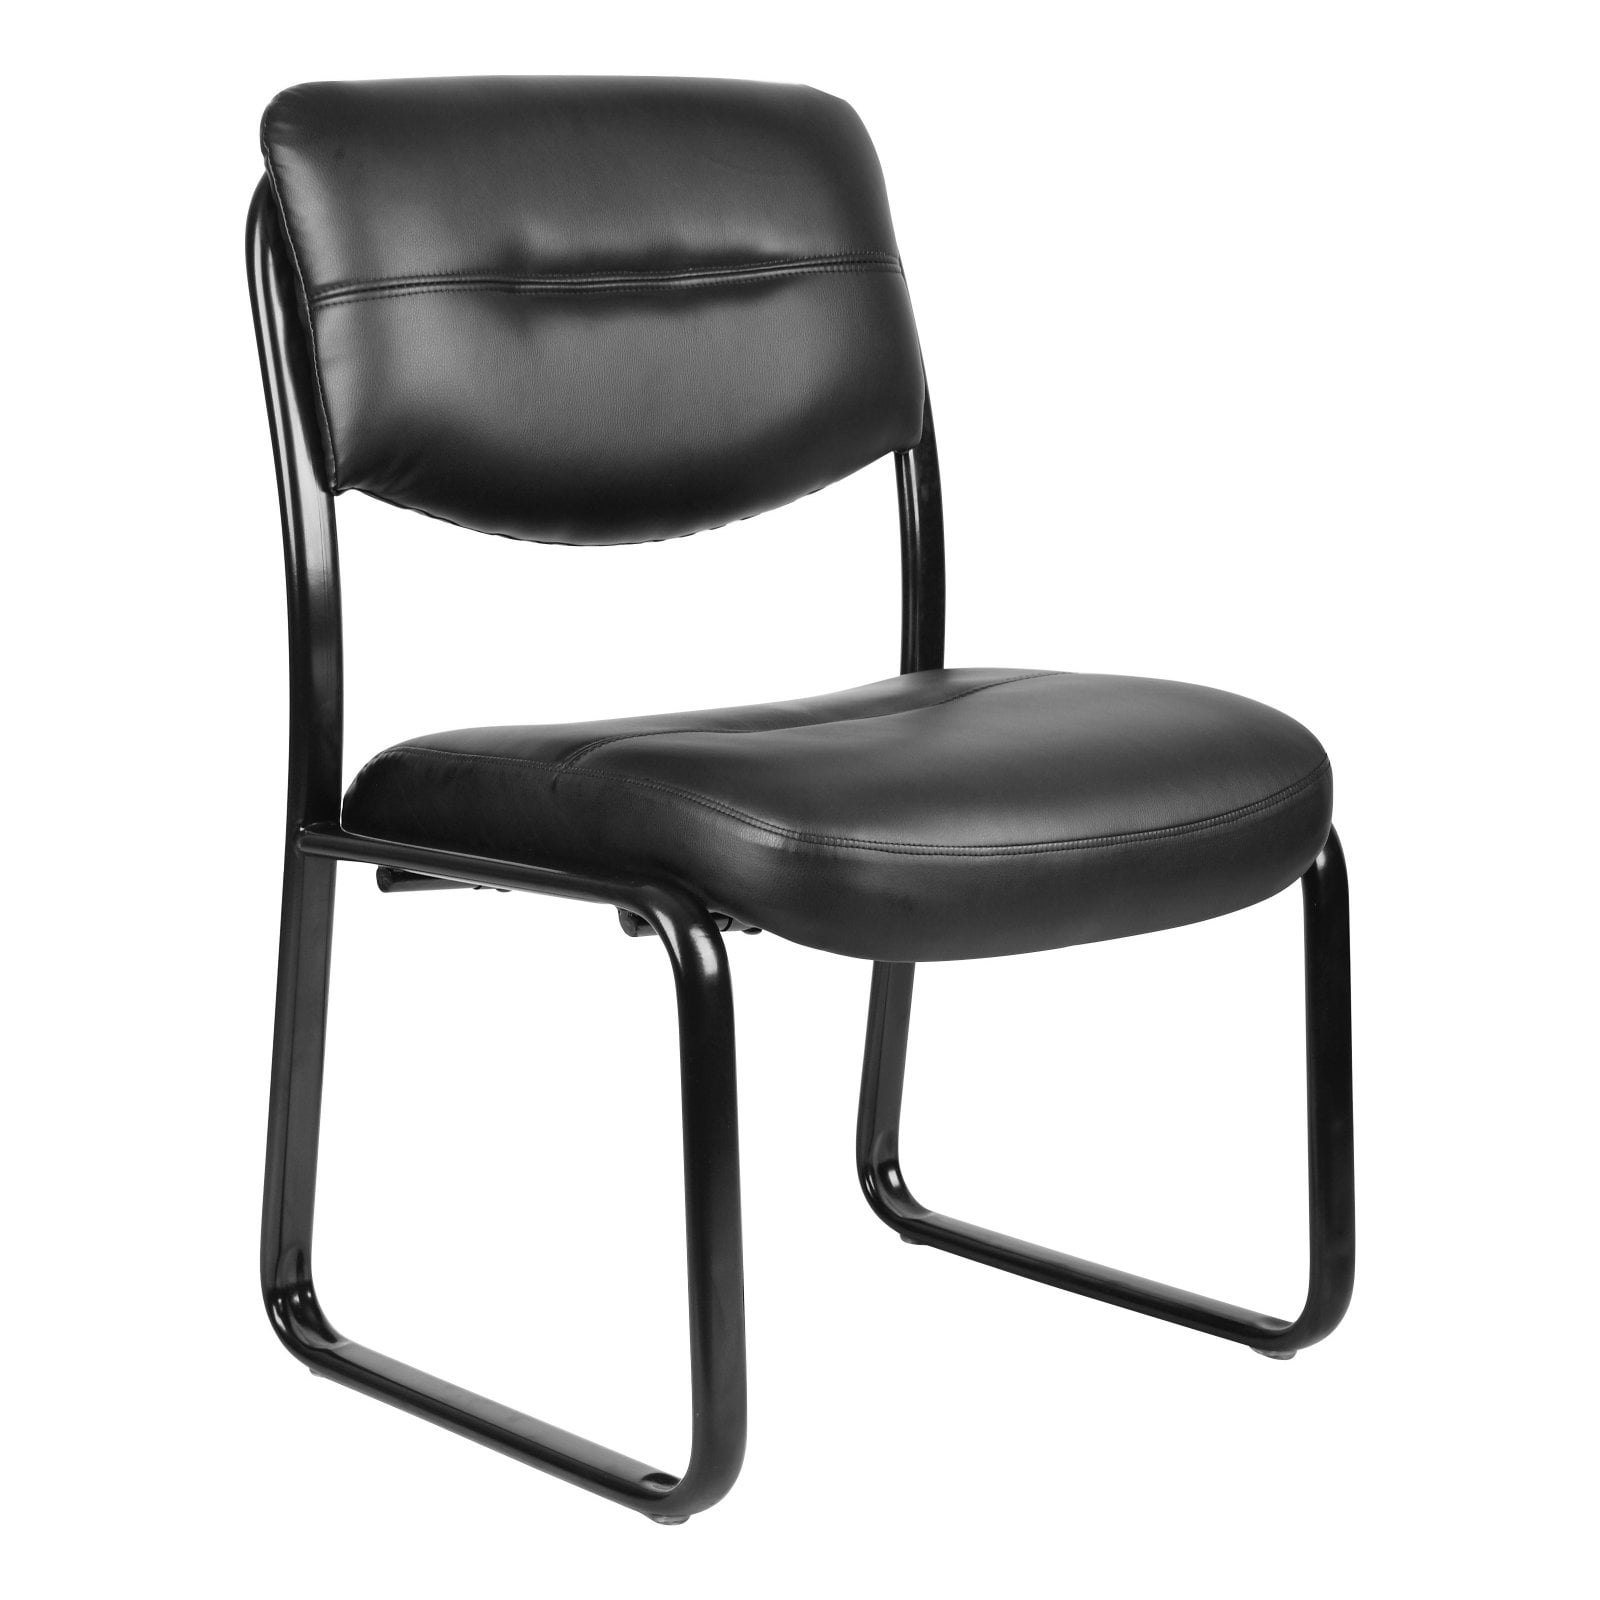 Set of 4 Boss Office Products Leather Sled Base Side Chair in Black 